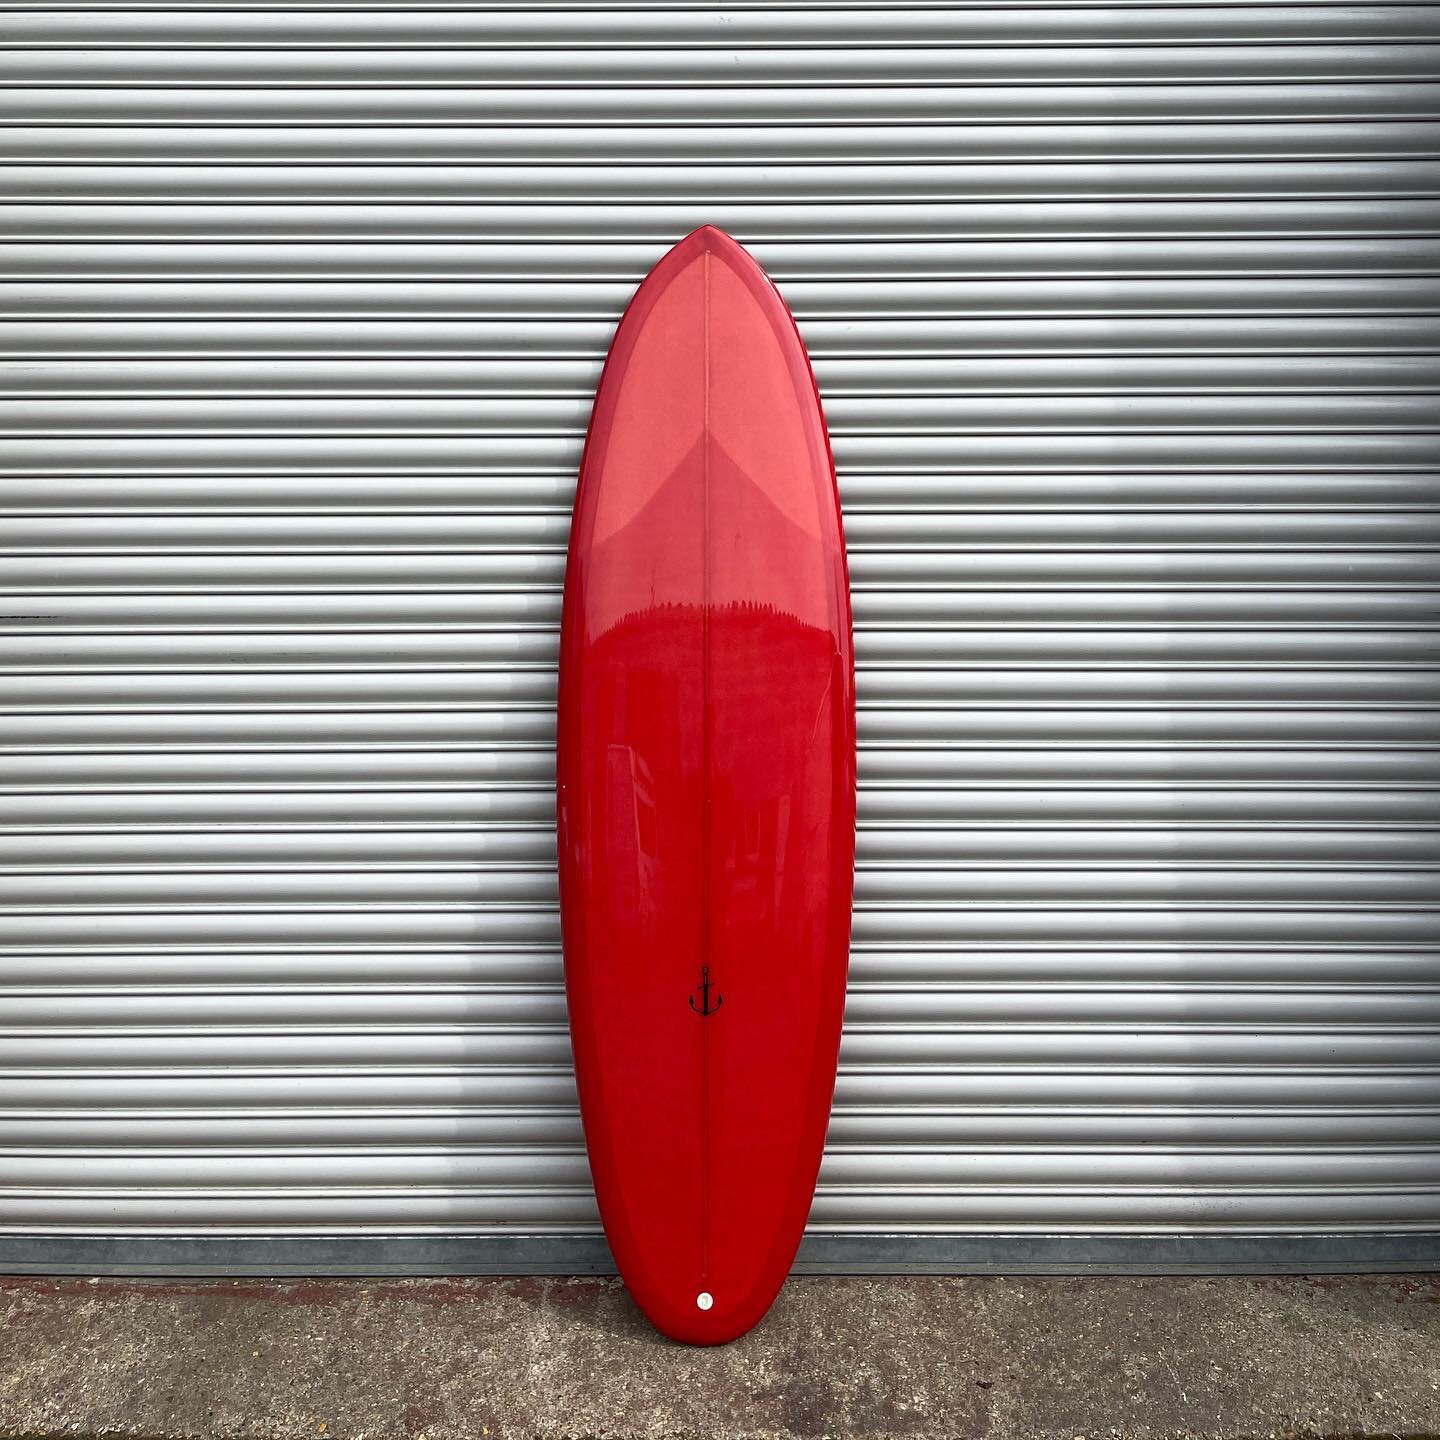 6&rsquo;6 one off with &lsquo;money maker&rsquo; tendencies .. but 3 fins .. double concave .. less volume than its beaked cousin and plenty of edge for fast release speed .. could go well with MR twin fin with smaller trailer kinda vibe. Available p